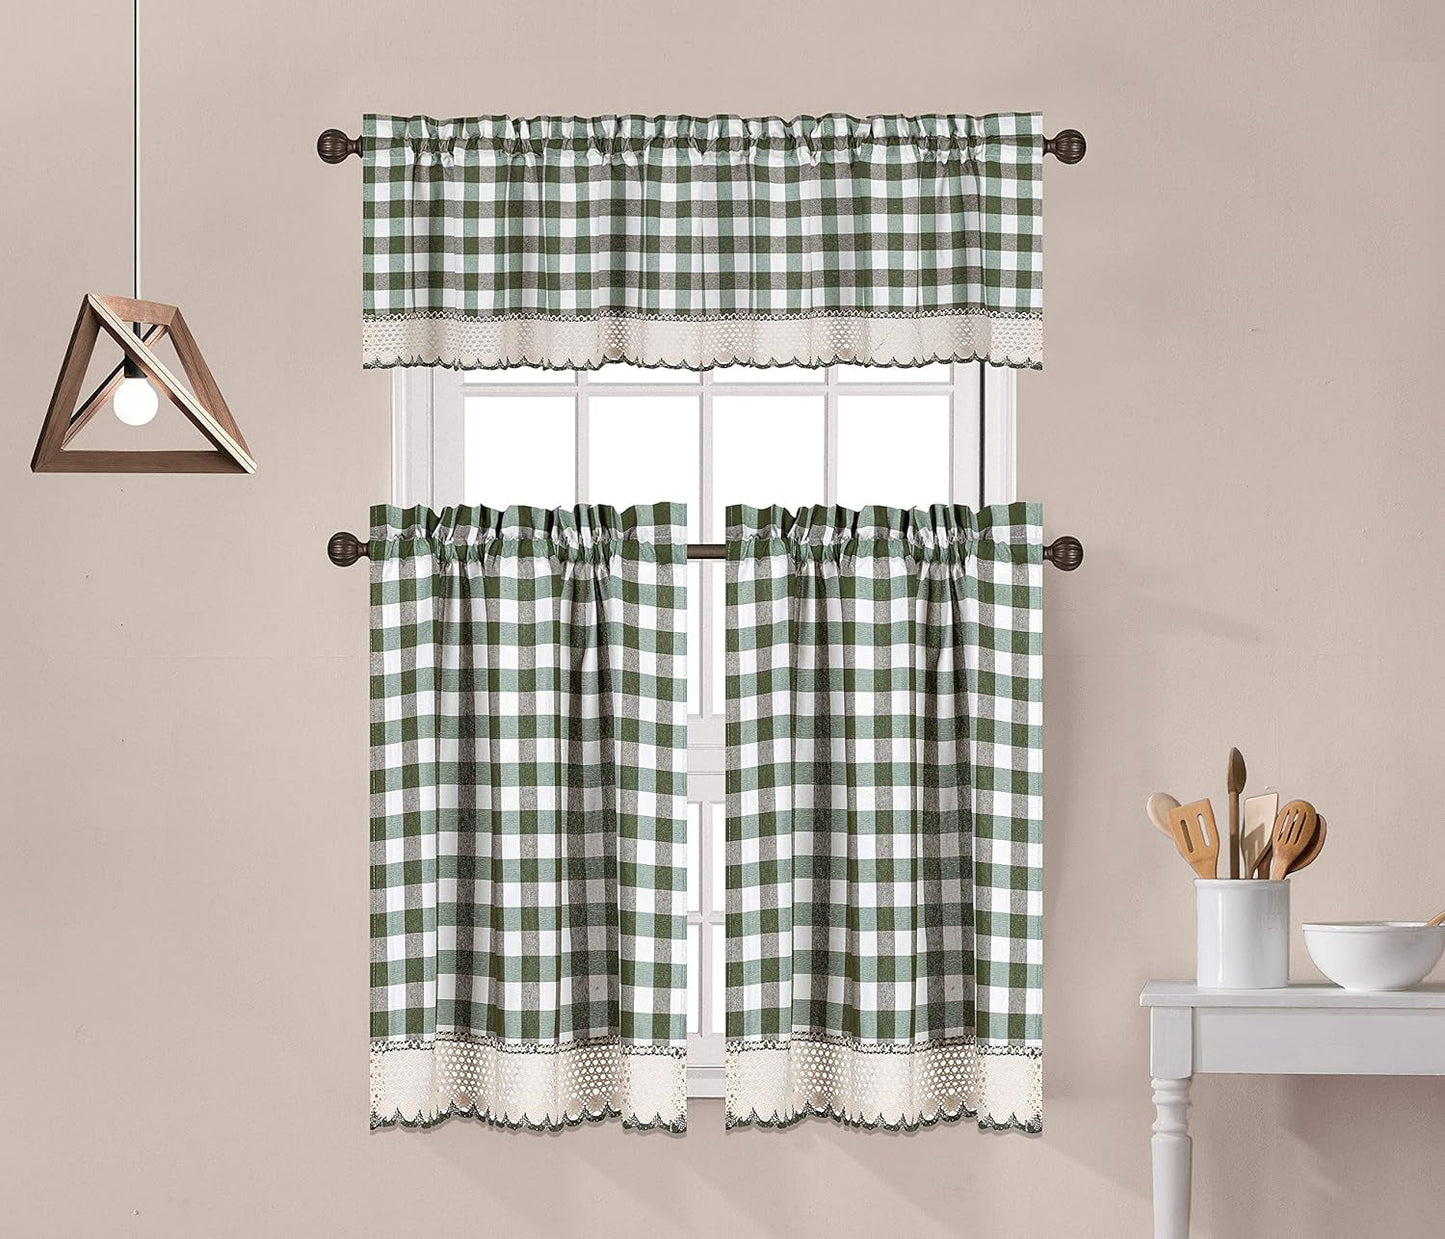 3 Piece Buffalo Check Plaid Gingham Crochet Lace Trimmed Kitchen Window Curtain Tiers & Valance Set (36" Tiers with 14" Valance, Navy/Beige)